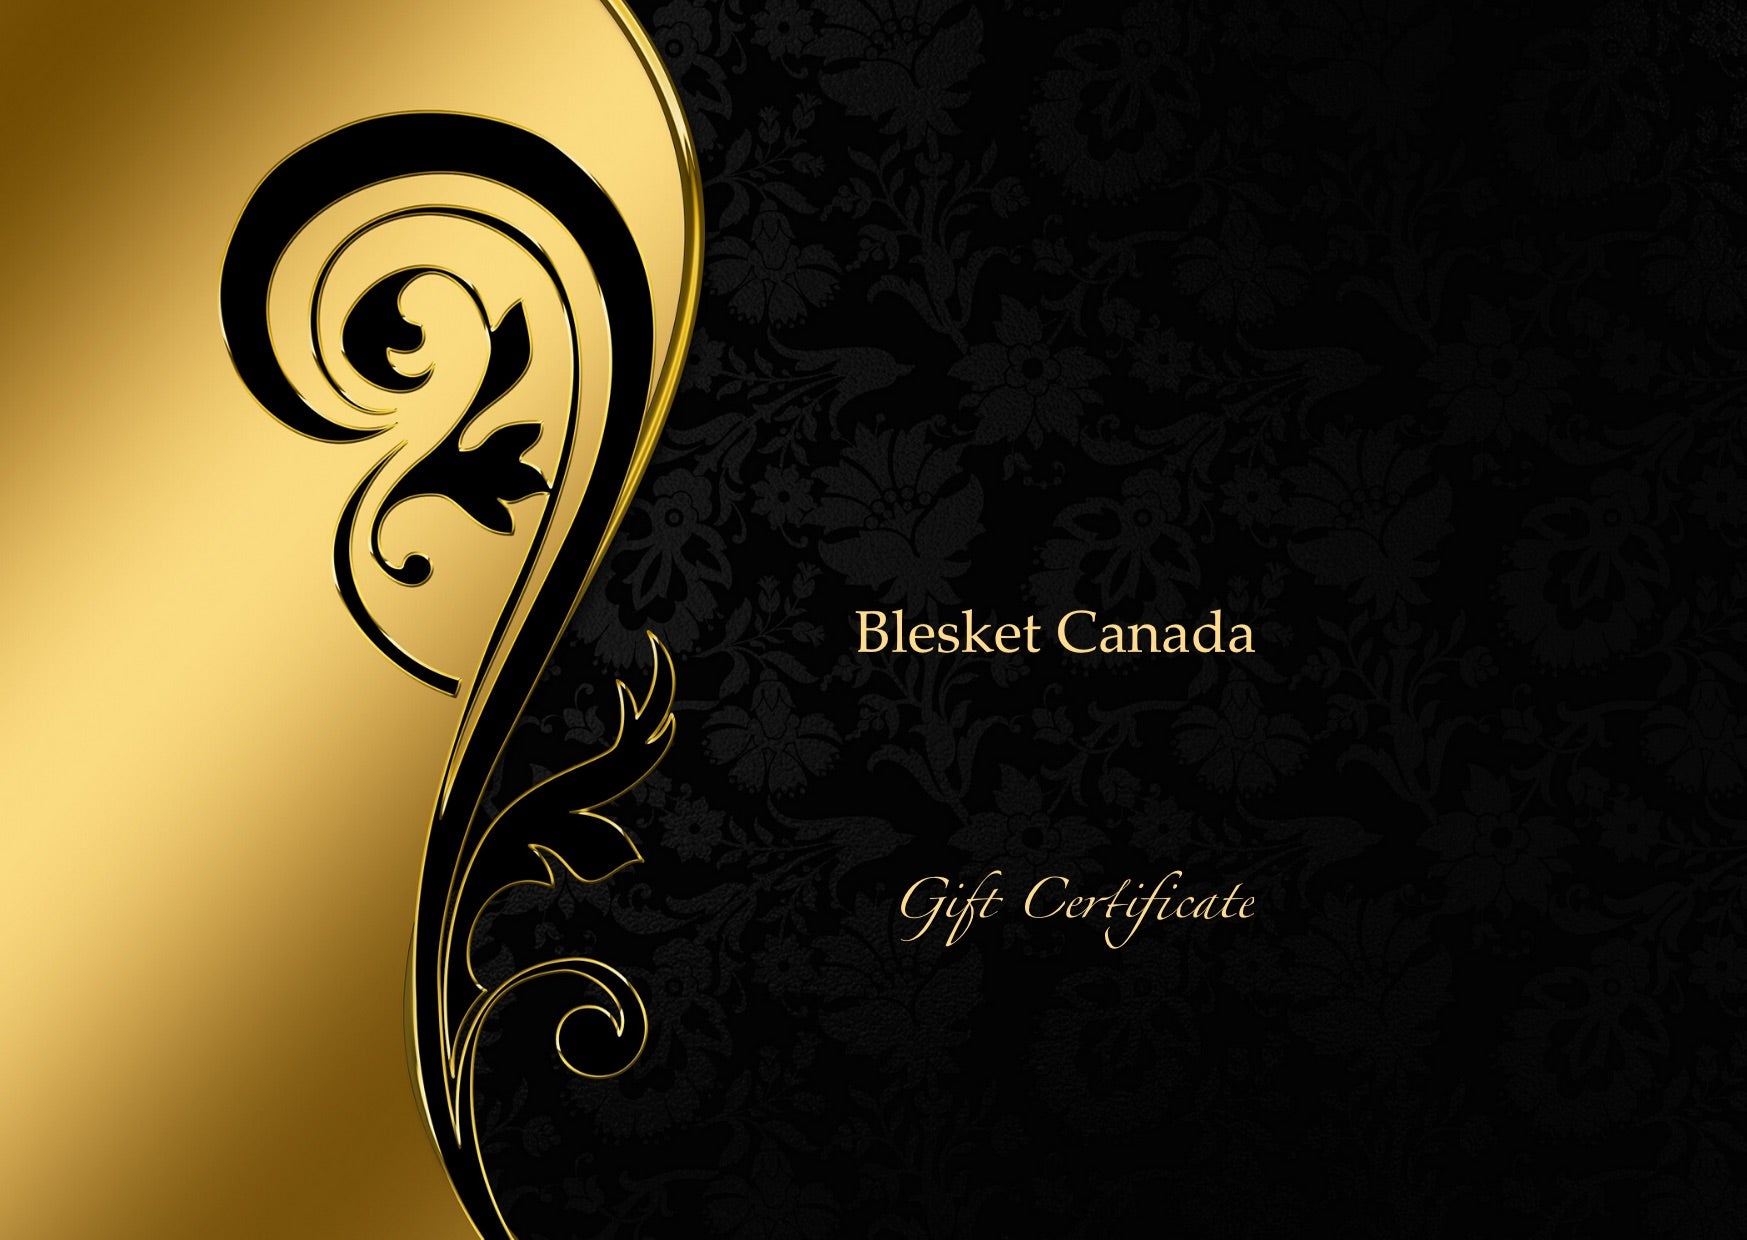 Gift Card - Blesket Canada